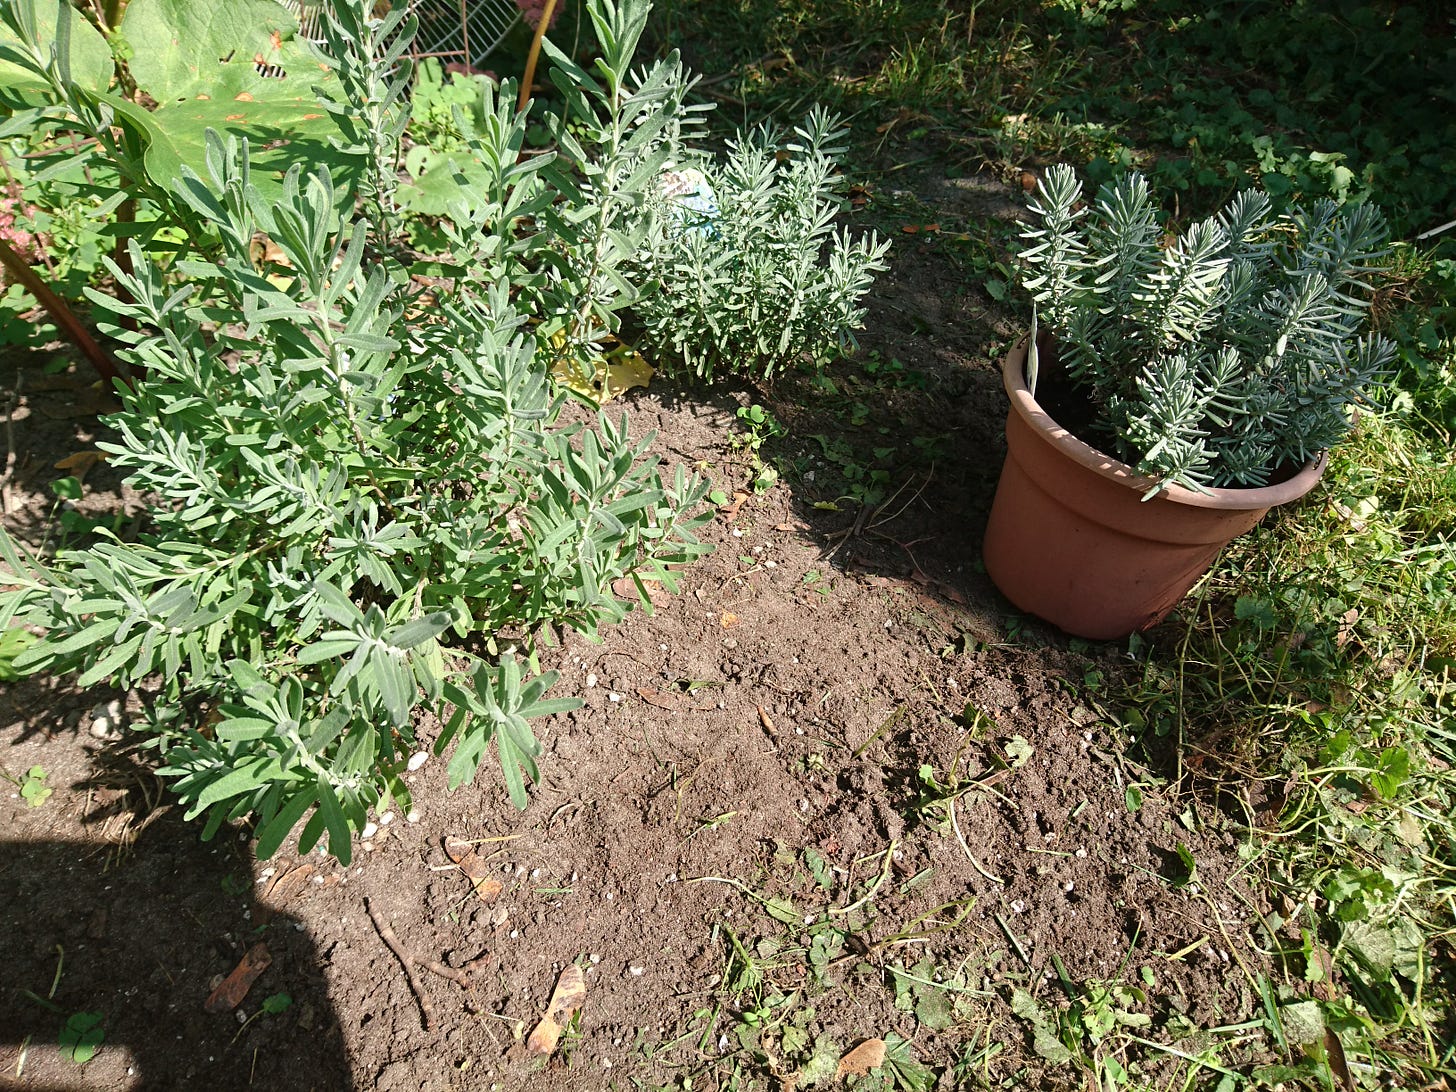 Lavender plants sit in the soil with rhubarb in the background. There is a smaller lavender plant in a pot to the right